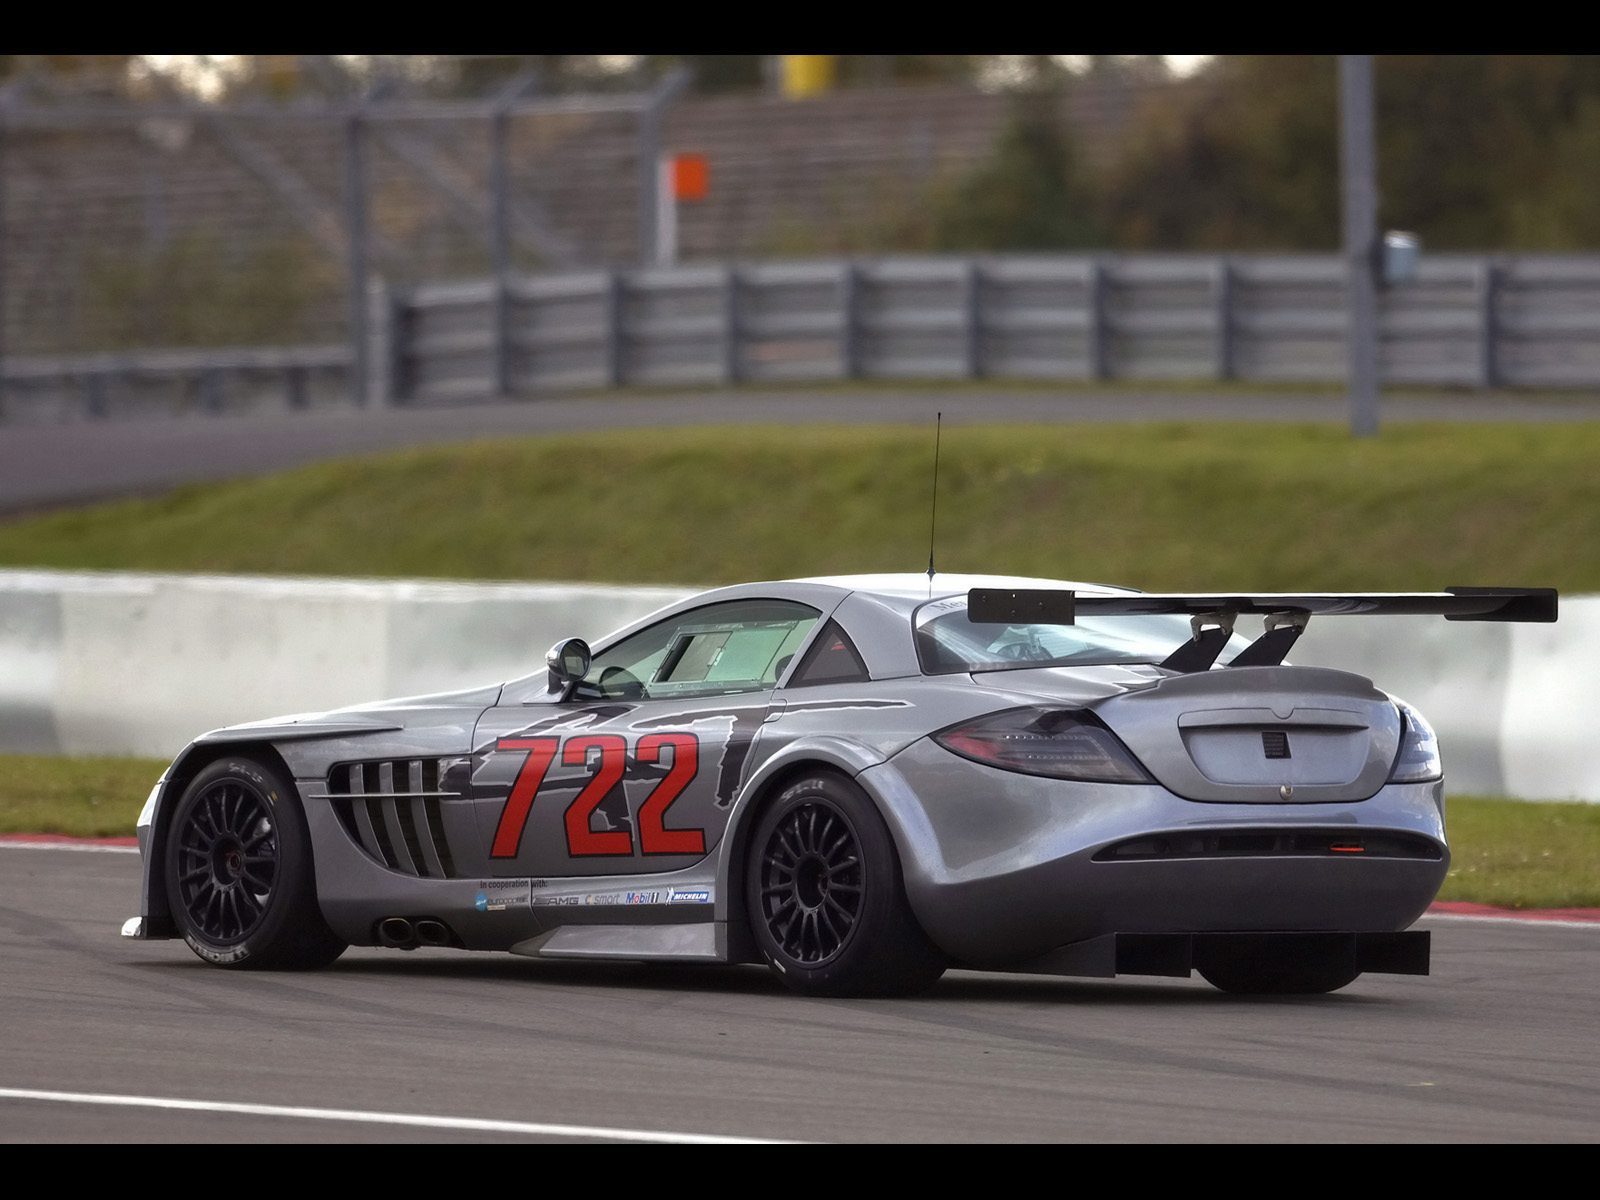 You can vote for this Mercedes-Benz SLR722 GT McLaren photo